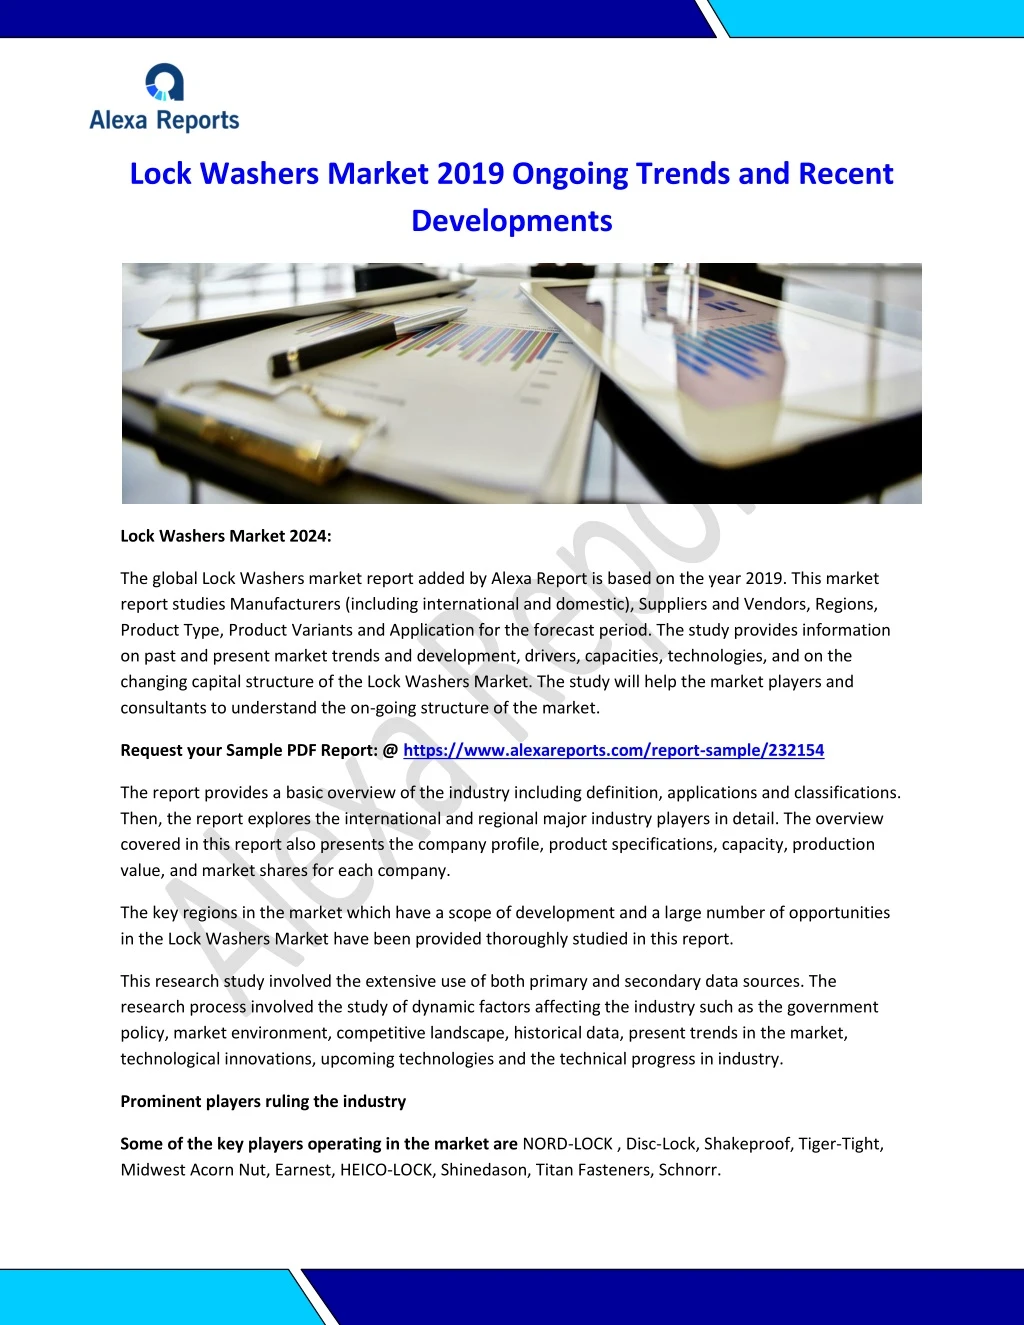 lock washers market 2019 ongoing trends